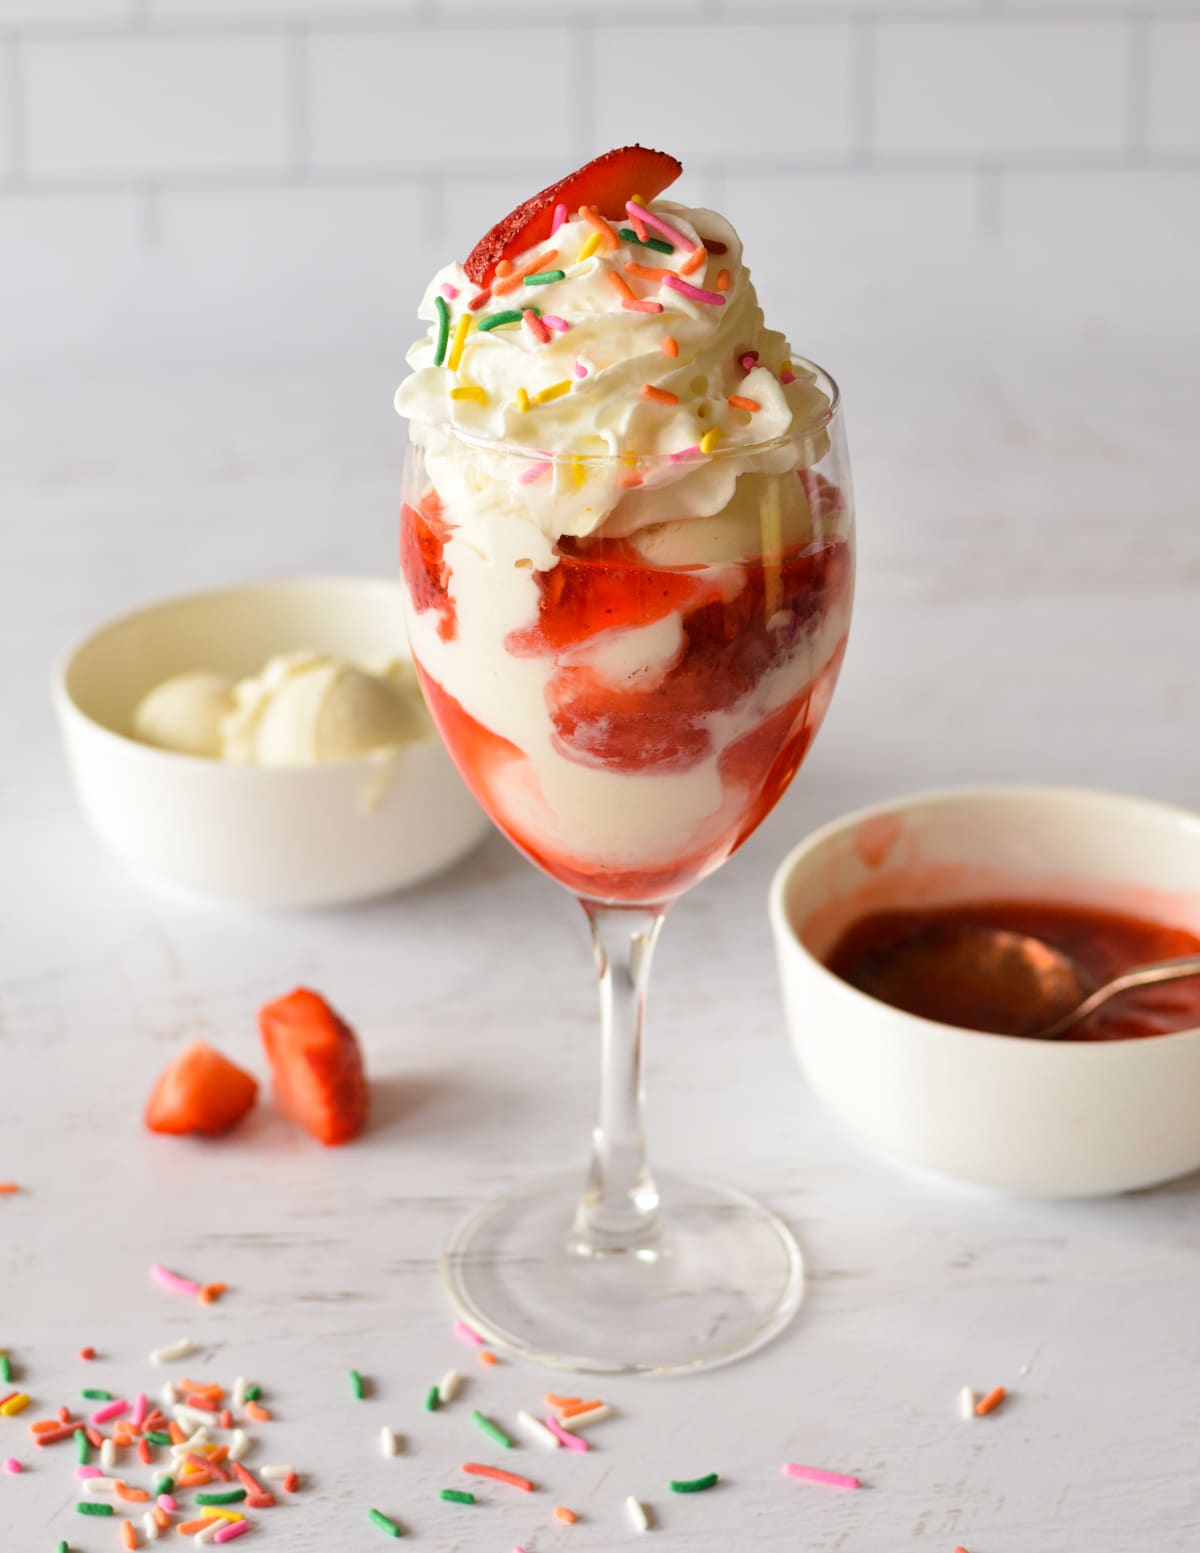 a strawberry sundae with whipped cream and sprinkles.